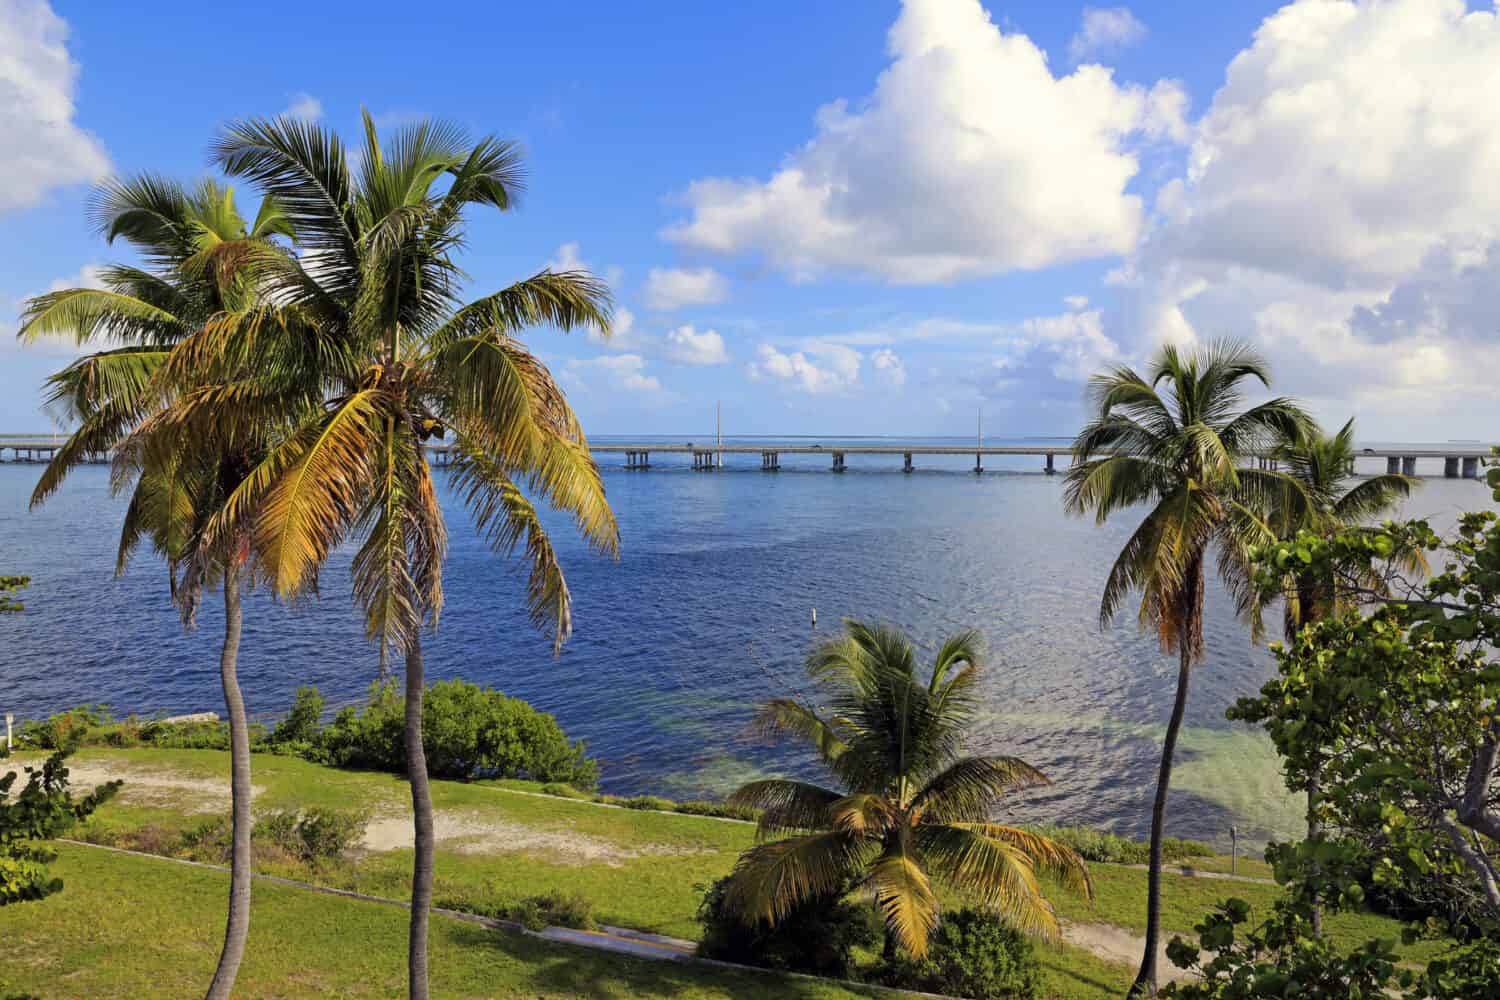 Beautiful Bahia Honda State Park in the Florida Keys features palm trees and a view of the Overseas Highway.